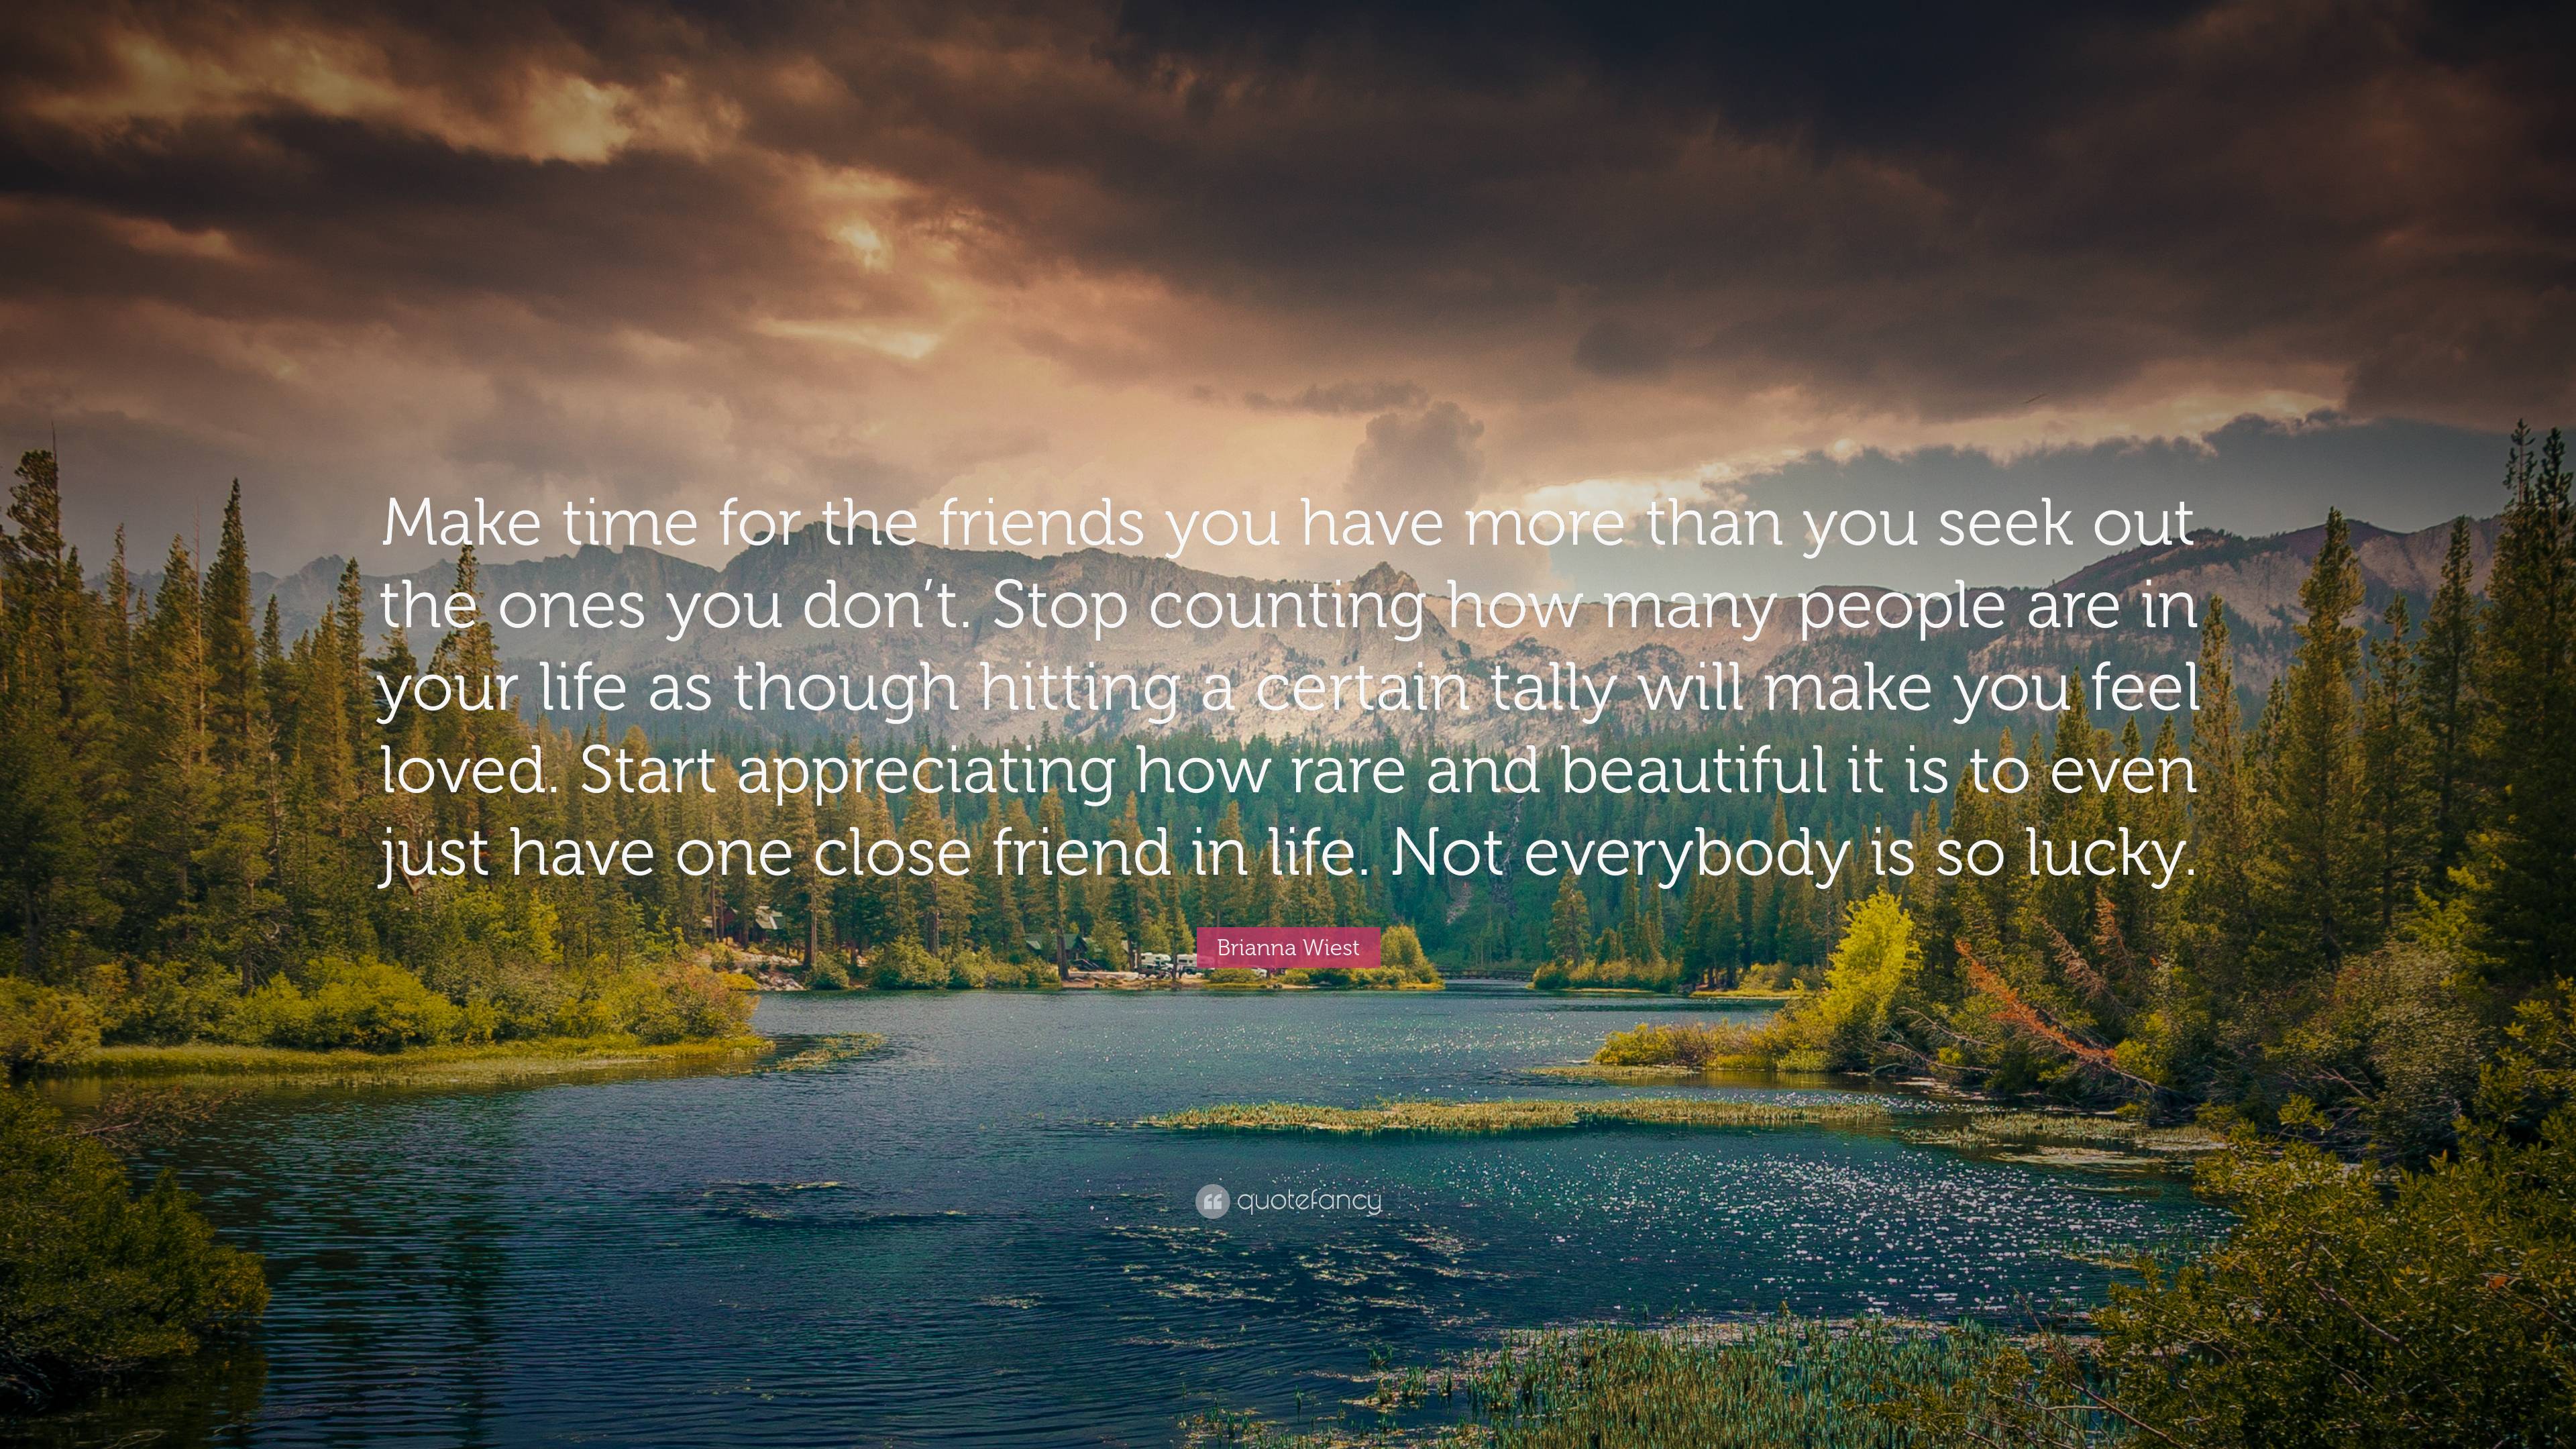 Brianna Wiest Quote: “Make time for the friends you have more than you ...